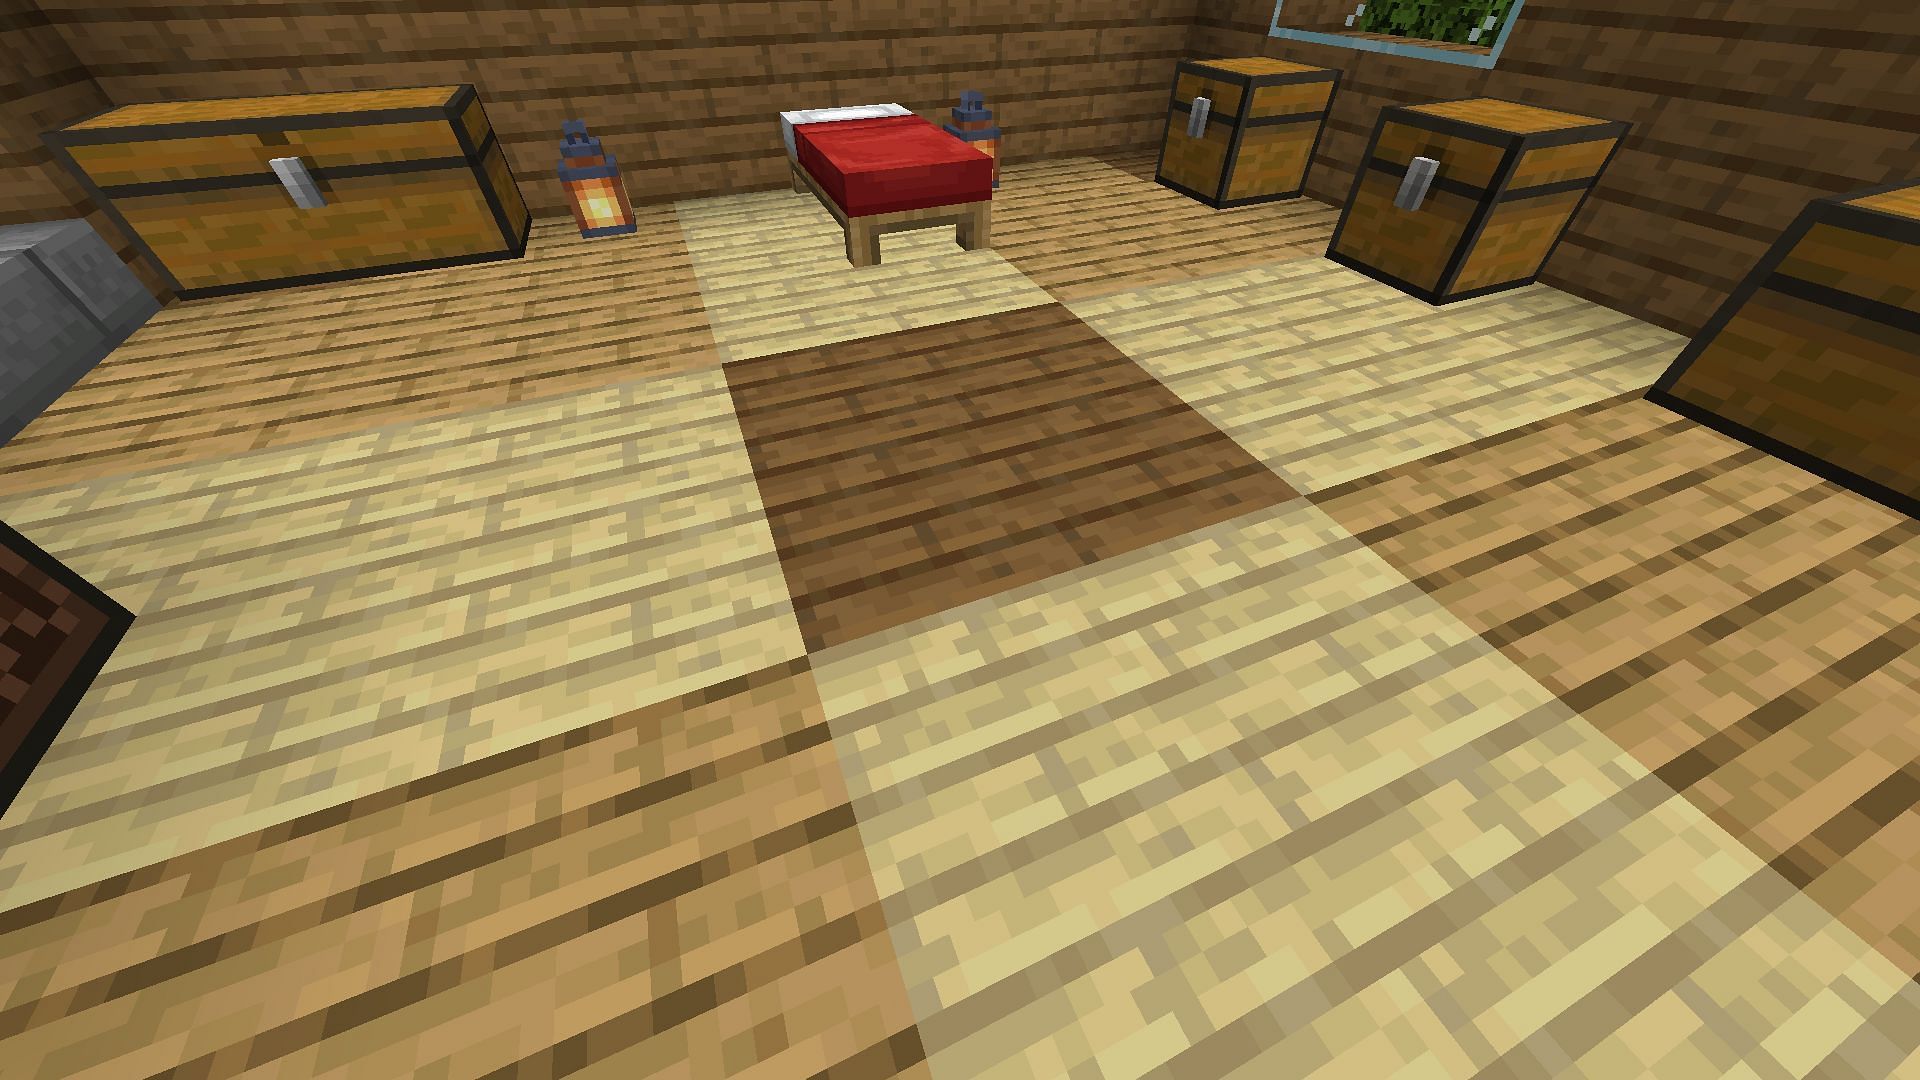 Different types of wood used for interior flooring (Image via Minecraft)